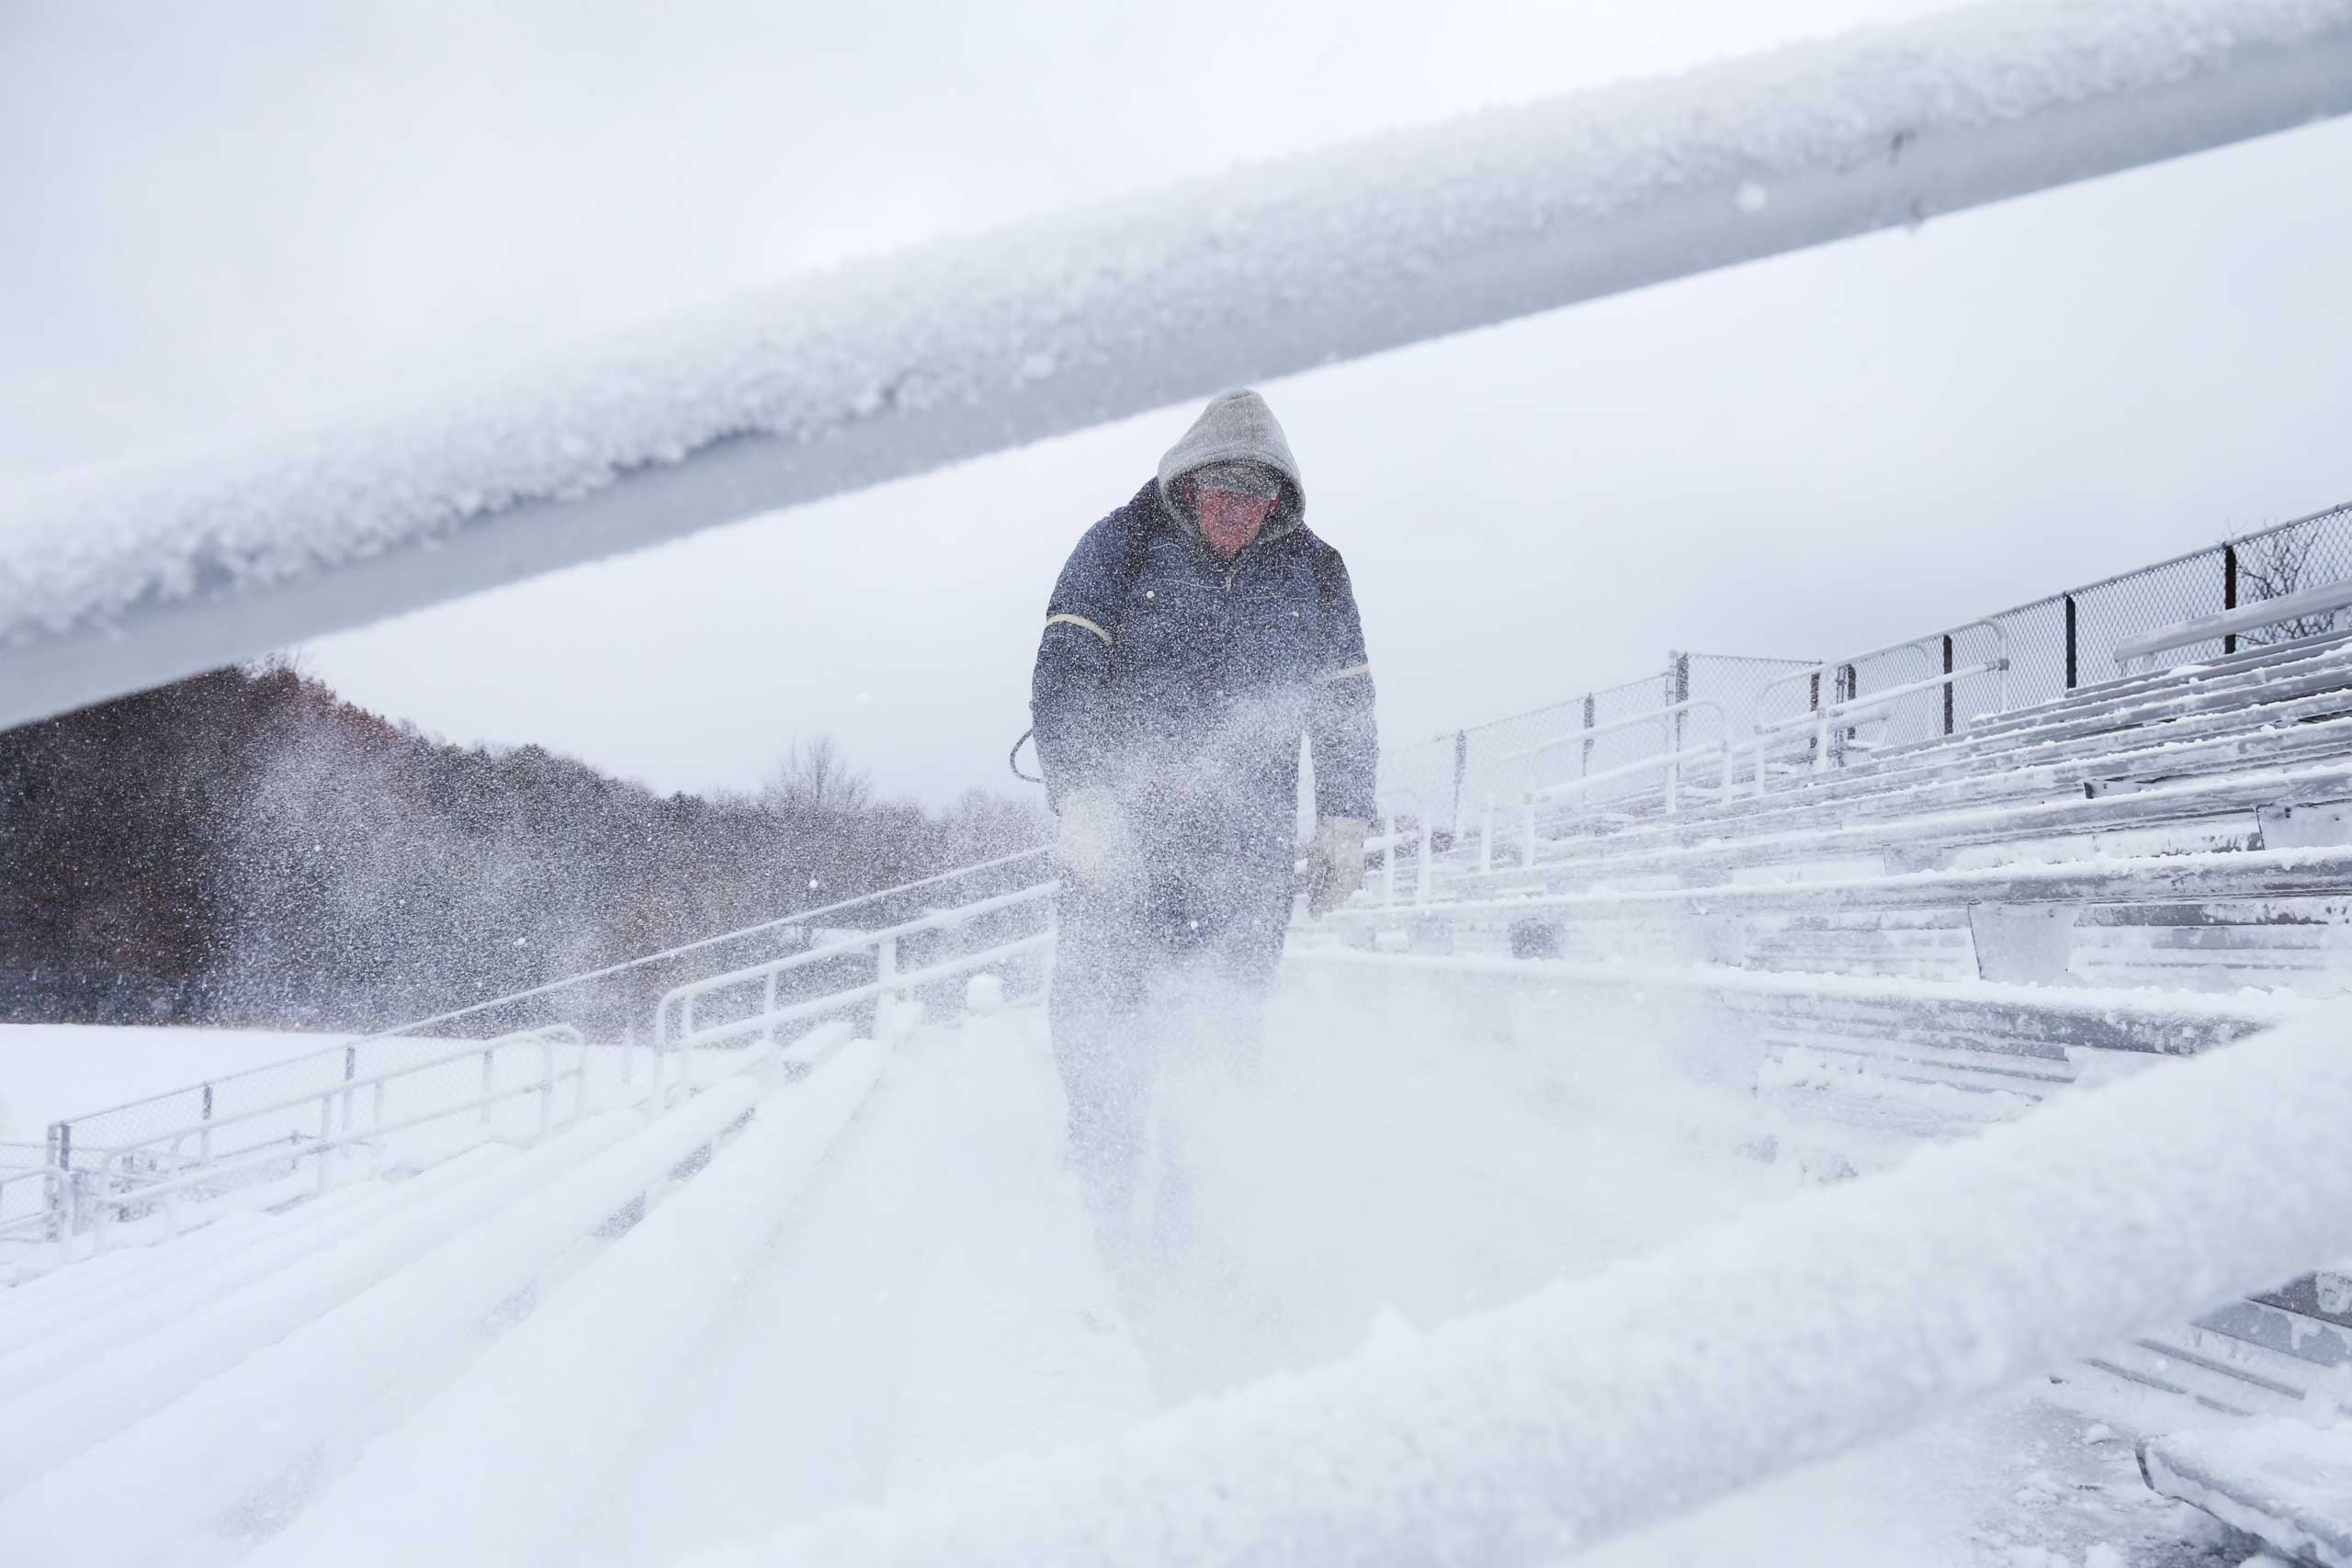 Jack Timmer uses a snow blower to remove snow from the Sailors Stadium before the Mona Shores High School football game in Norton Shores, Mich. on Nov. 14, 2014. (Andraya Croft—The Muskegon Chronicle/AP)